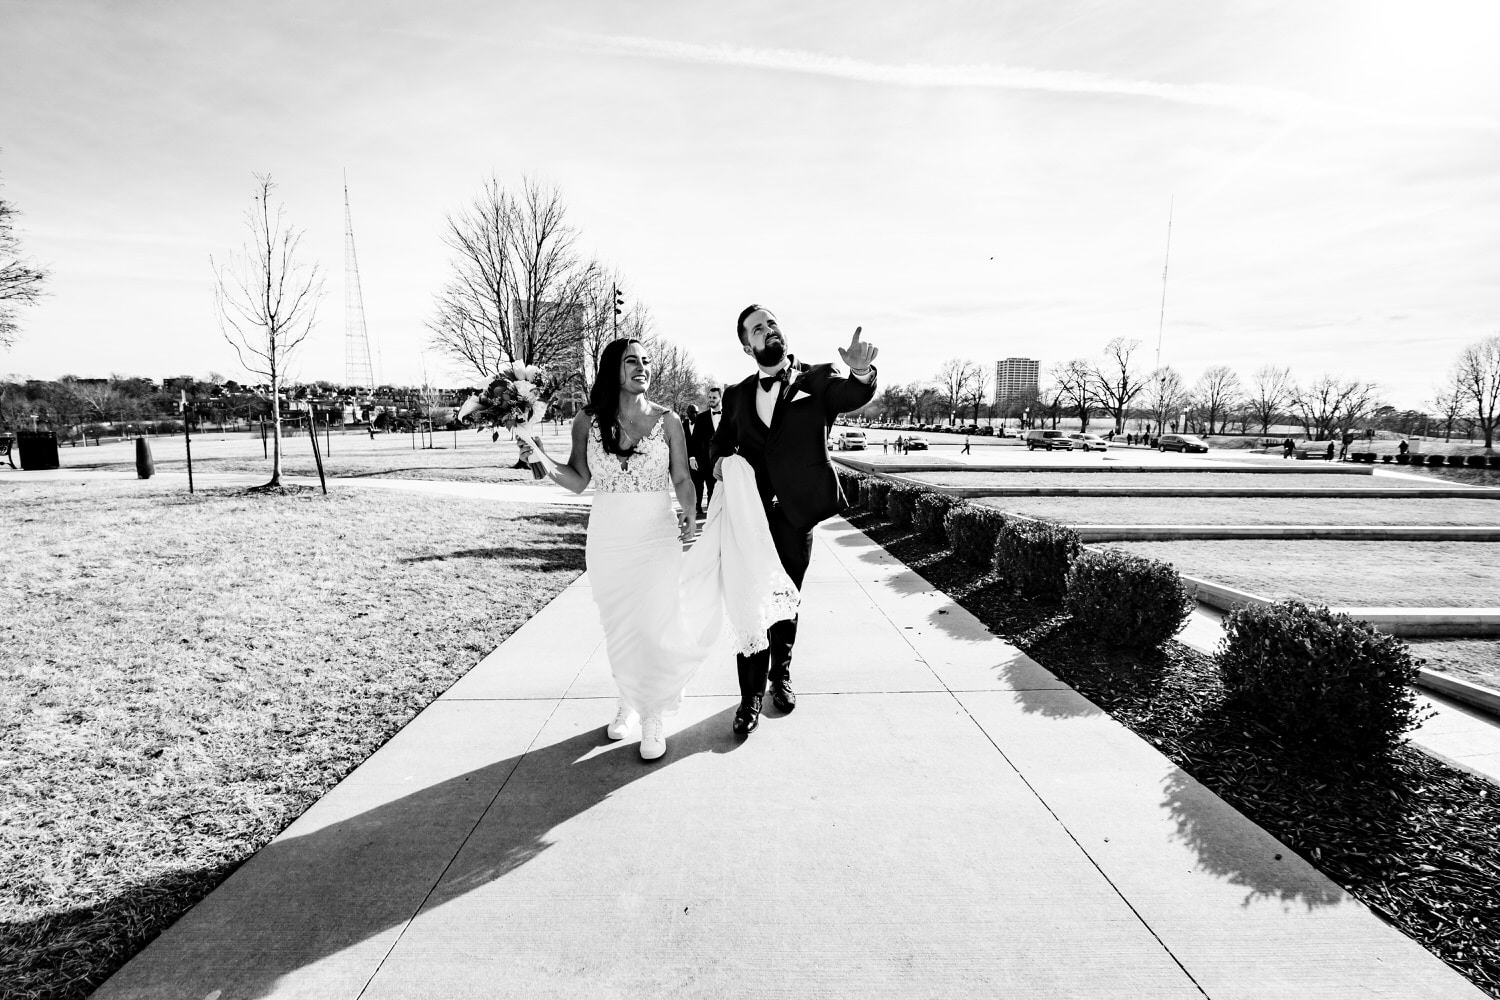 A candid black and white picture taken from a distance of a bride and groom laughing together as the groom points something out. 